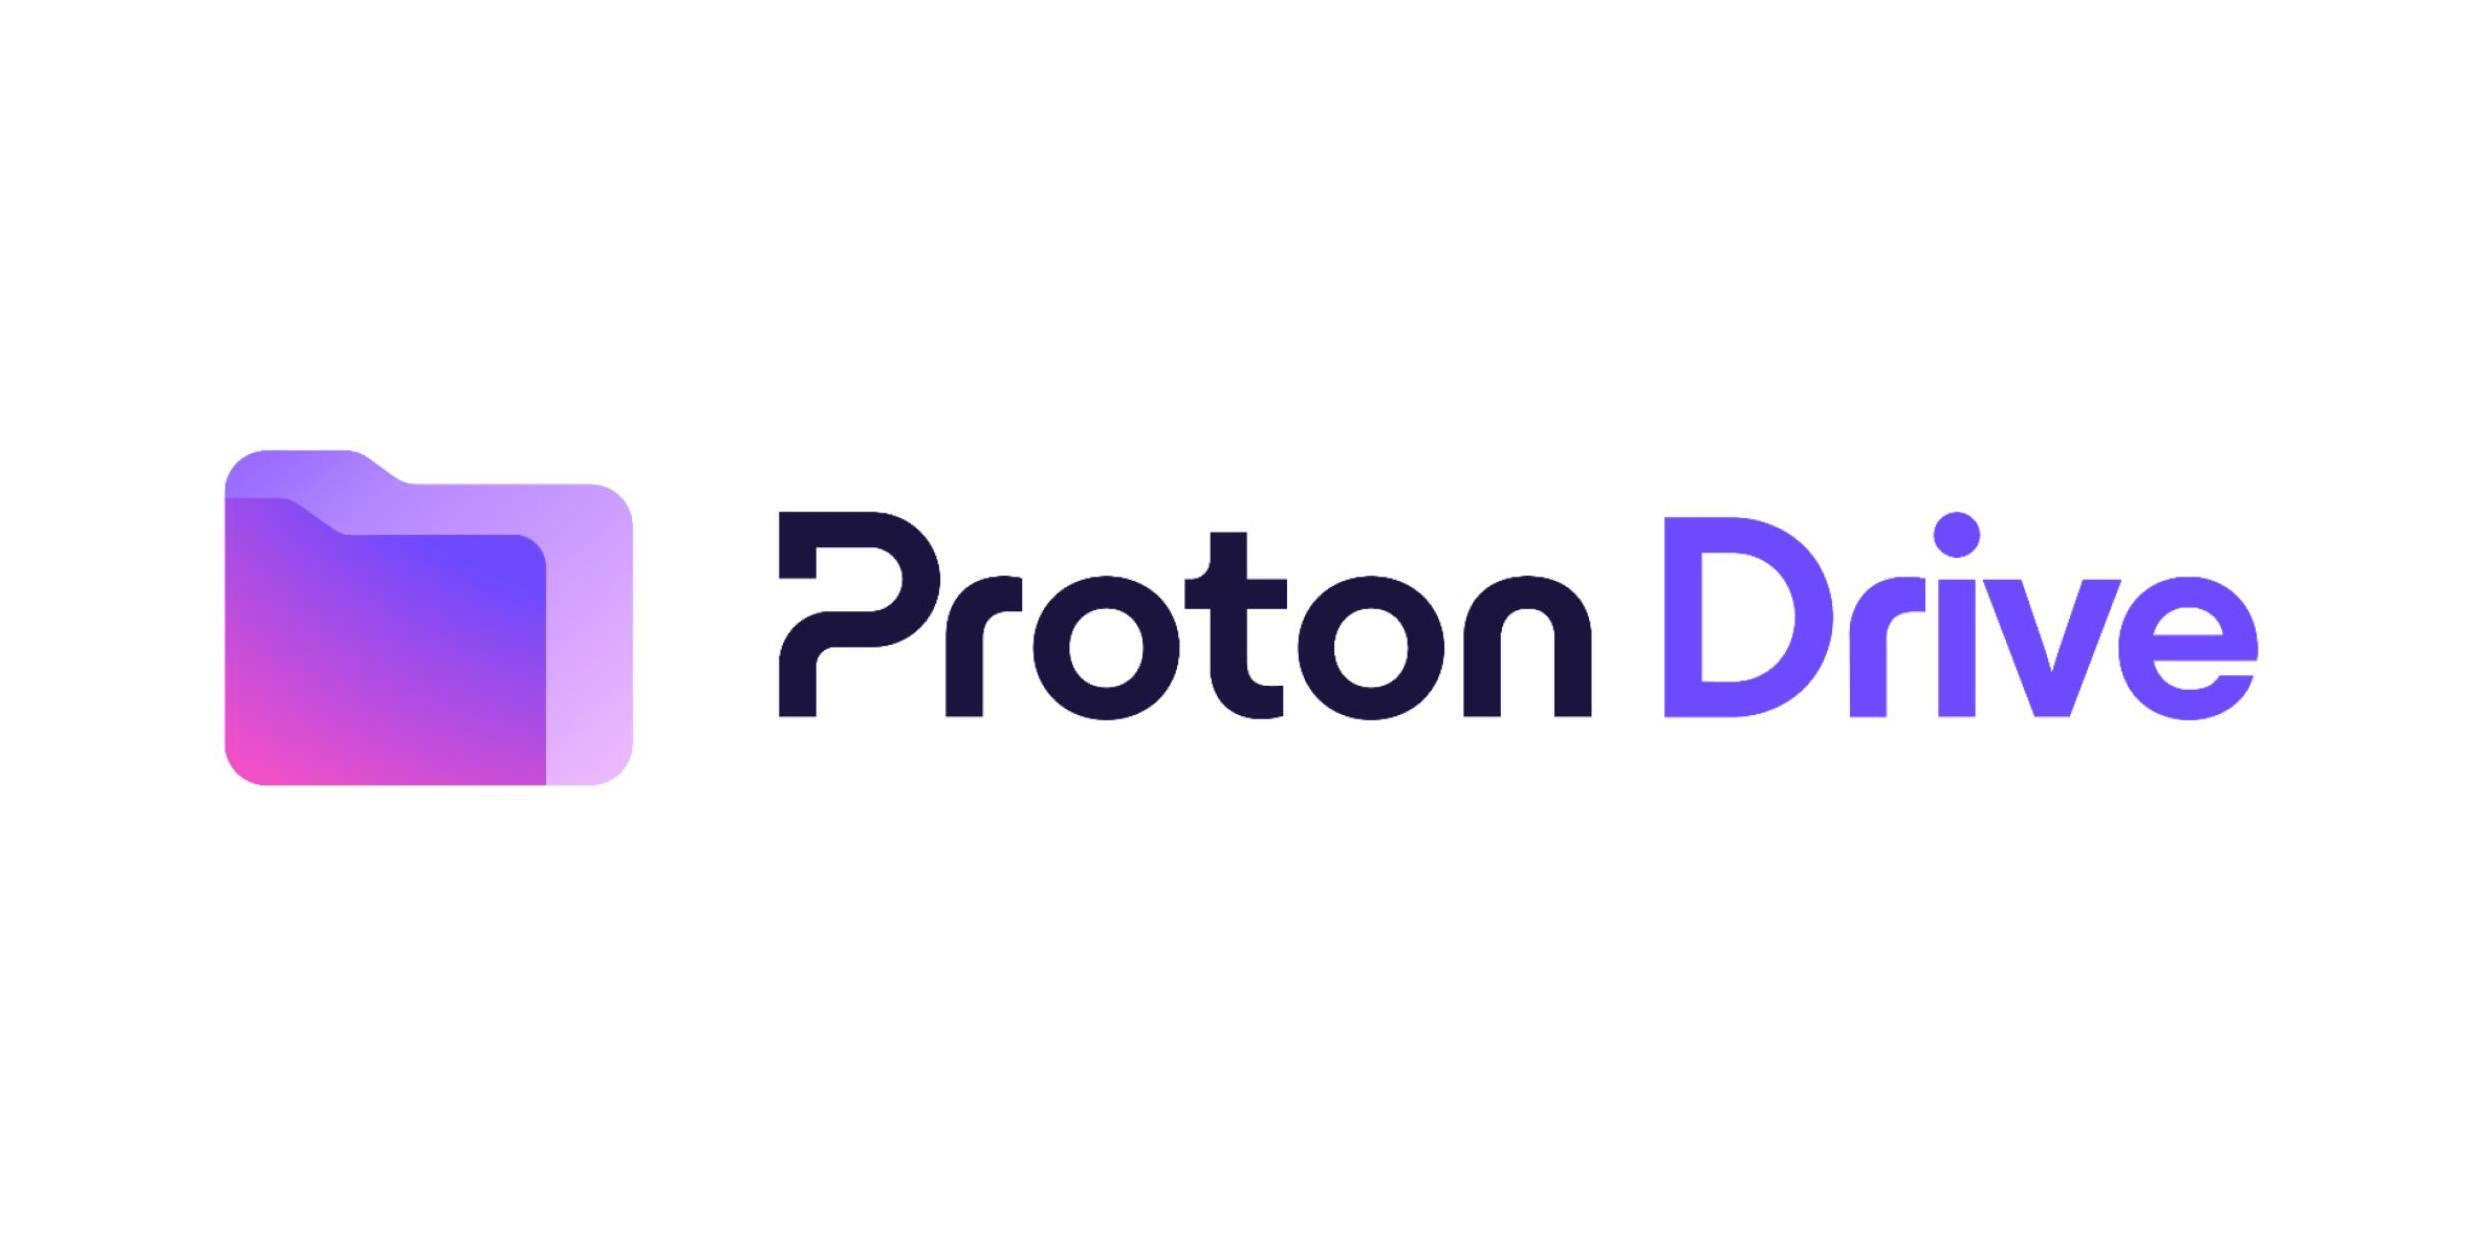 How to Fix "Cannot Upload: File No Longer Exists" Error on Proton Drive ? 4